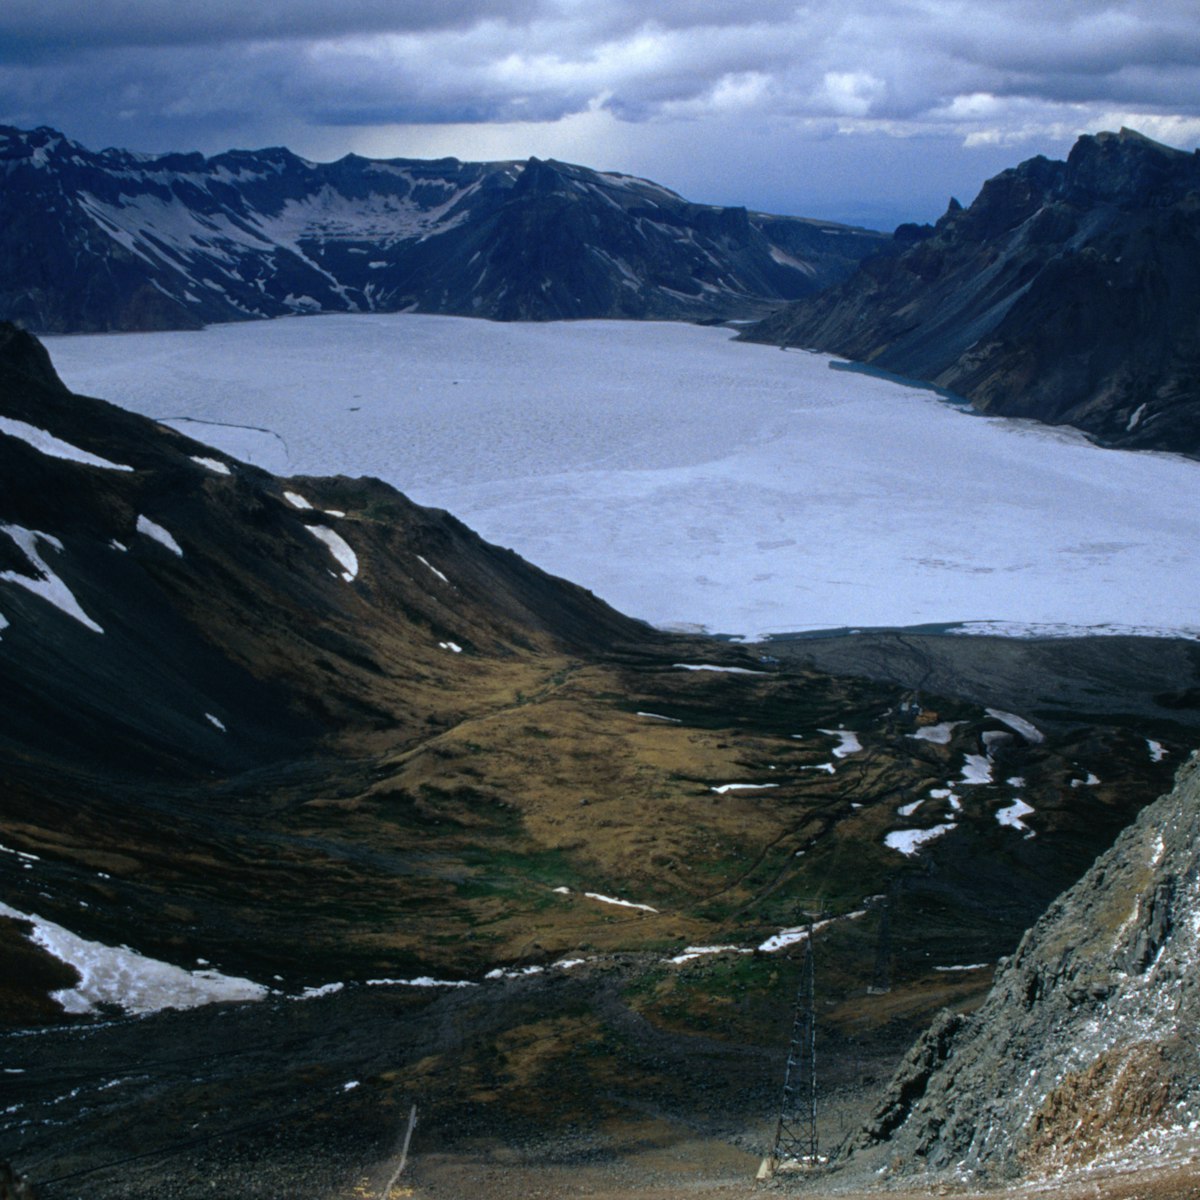 Frozen Lake Chon in late May from Mt Paekdu. The lake straddles the Chinese border.